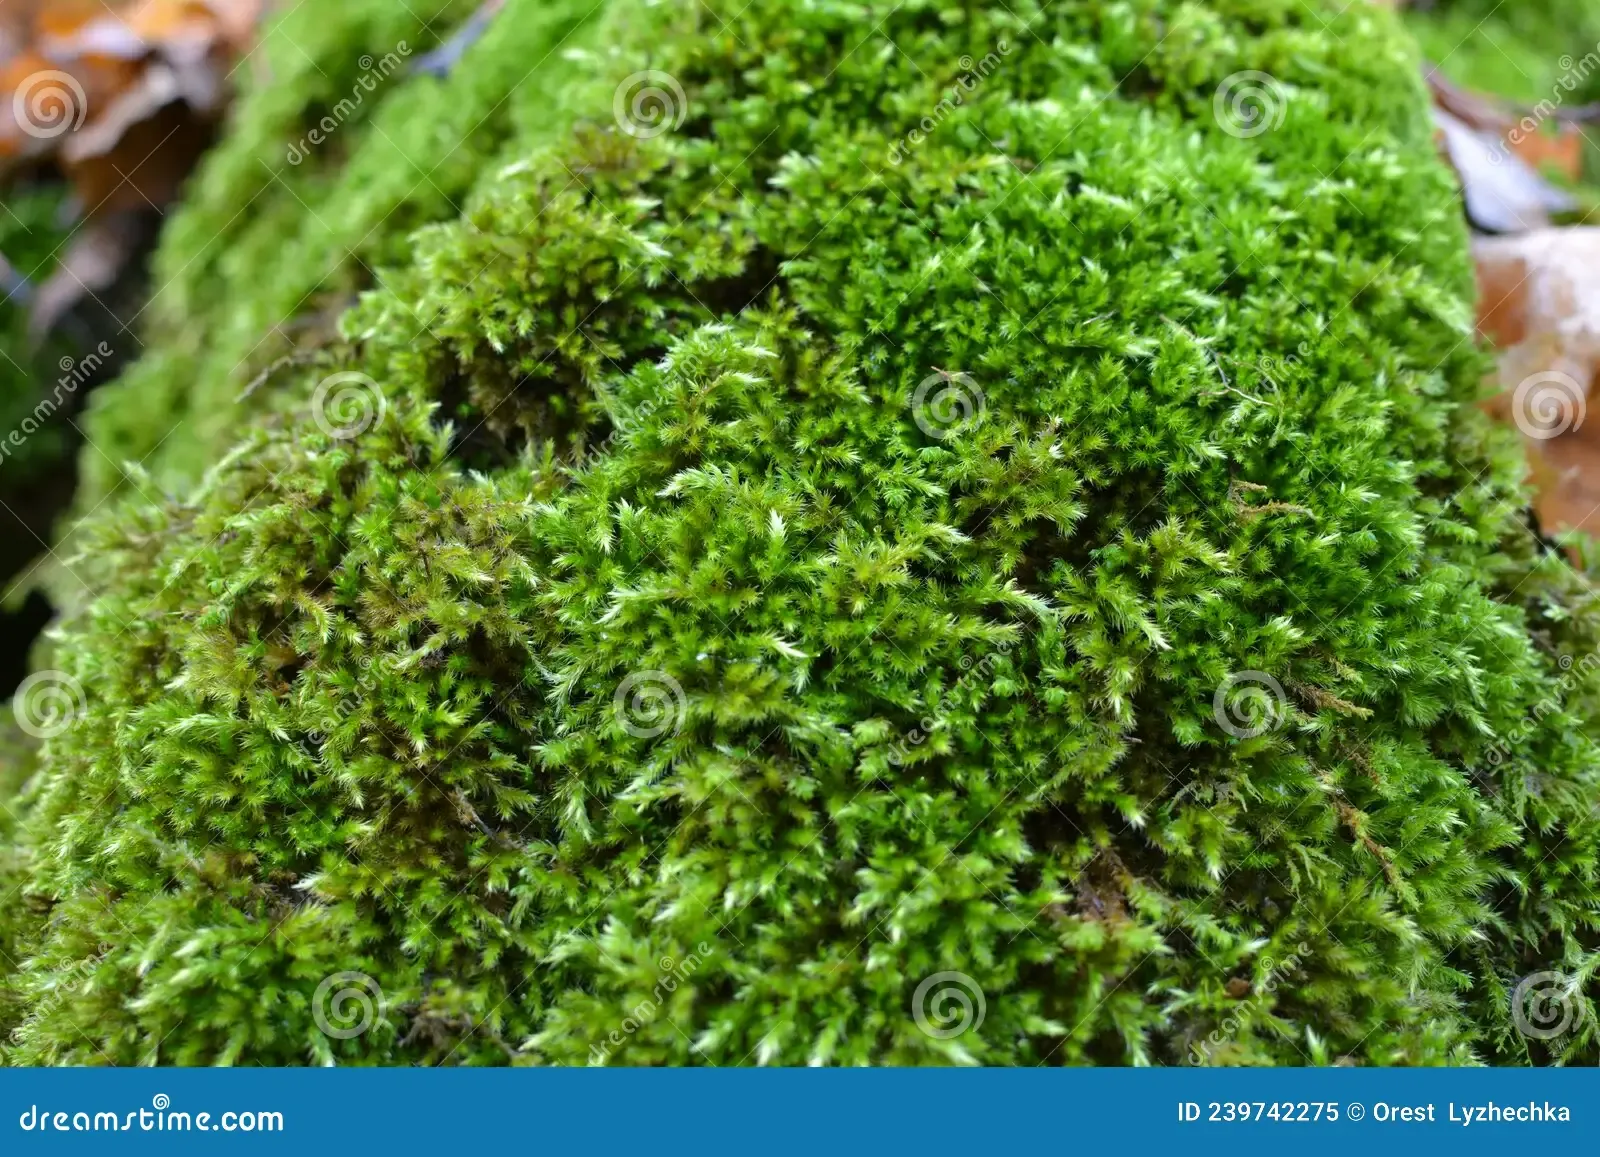 forest-wild-stone-grows-moss-anomodon-anomodon-moss-grows-stone-forest-239742275.jpg